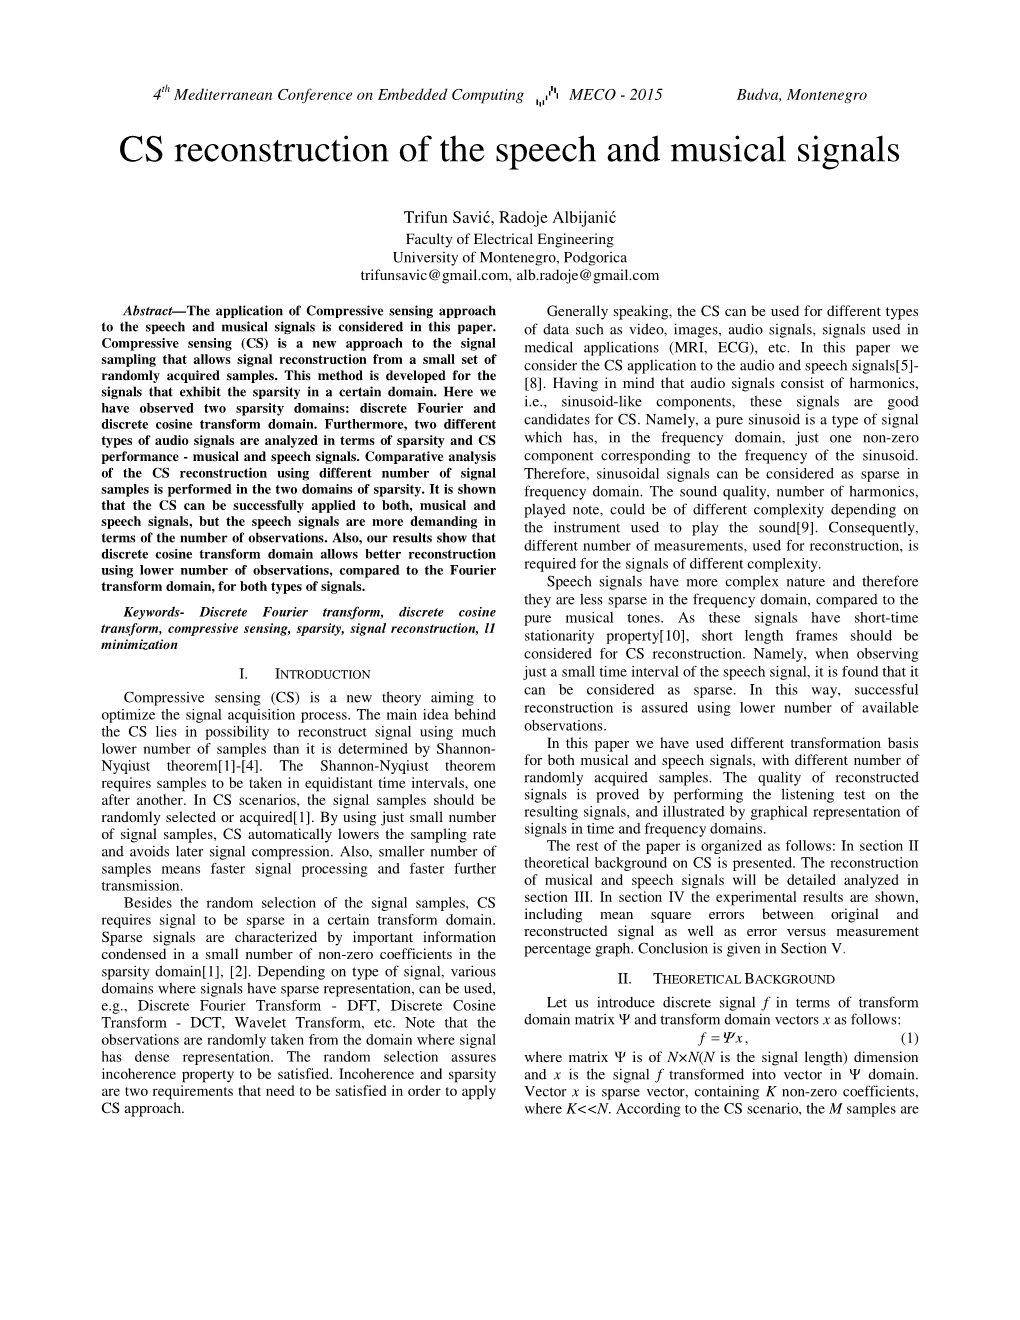 CS Reconstruction of the Speech and Musical Signals